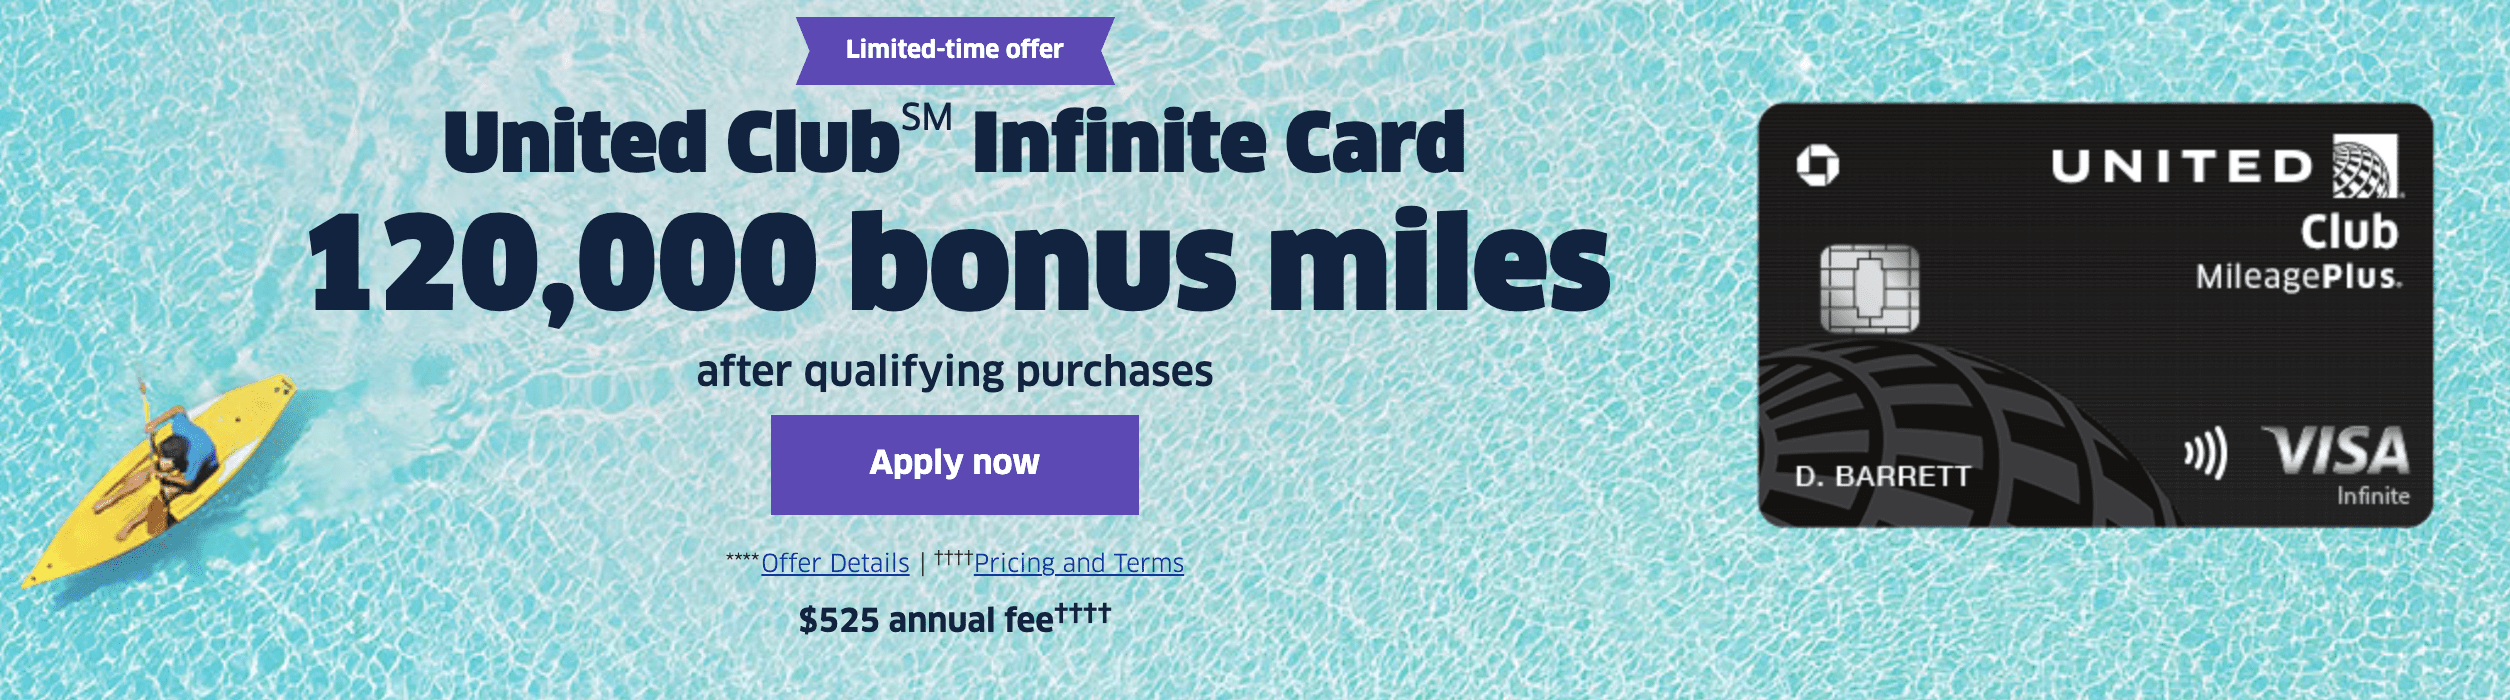 Expired] Chase United Club Infinite Card 120,000 Mile Bonus With $6,000  Spend ($525 Annual Fee) - Doctor Of Credit